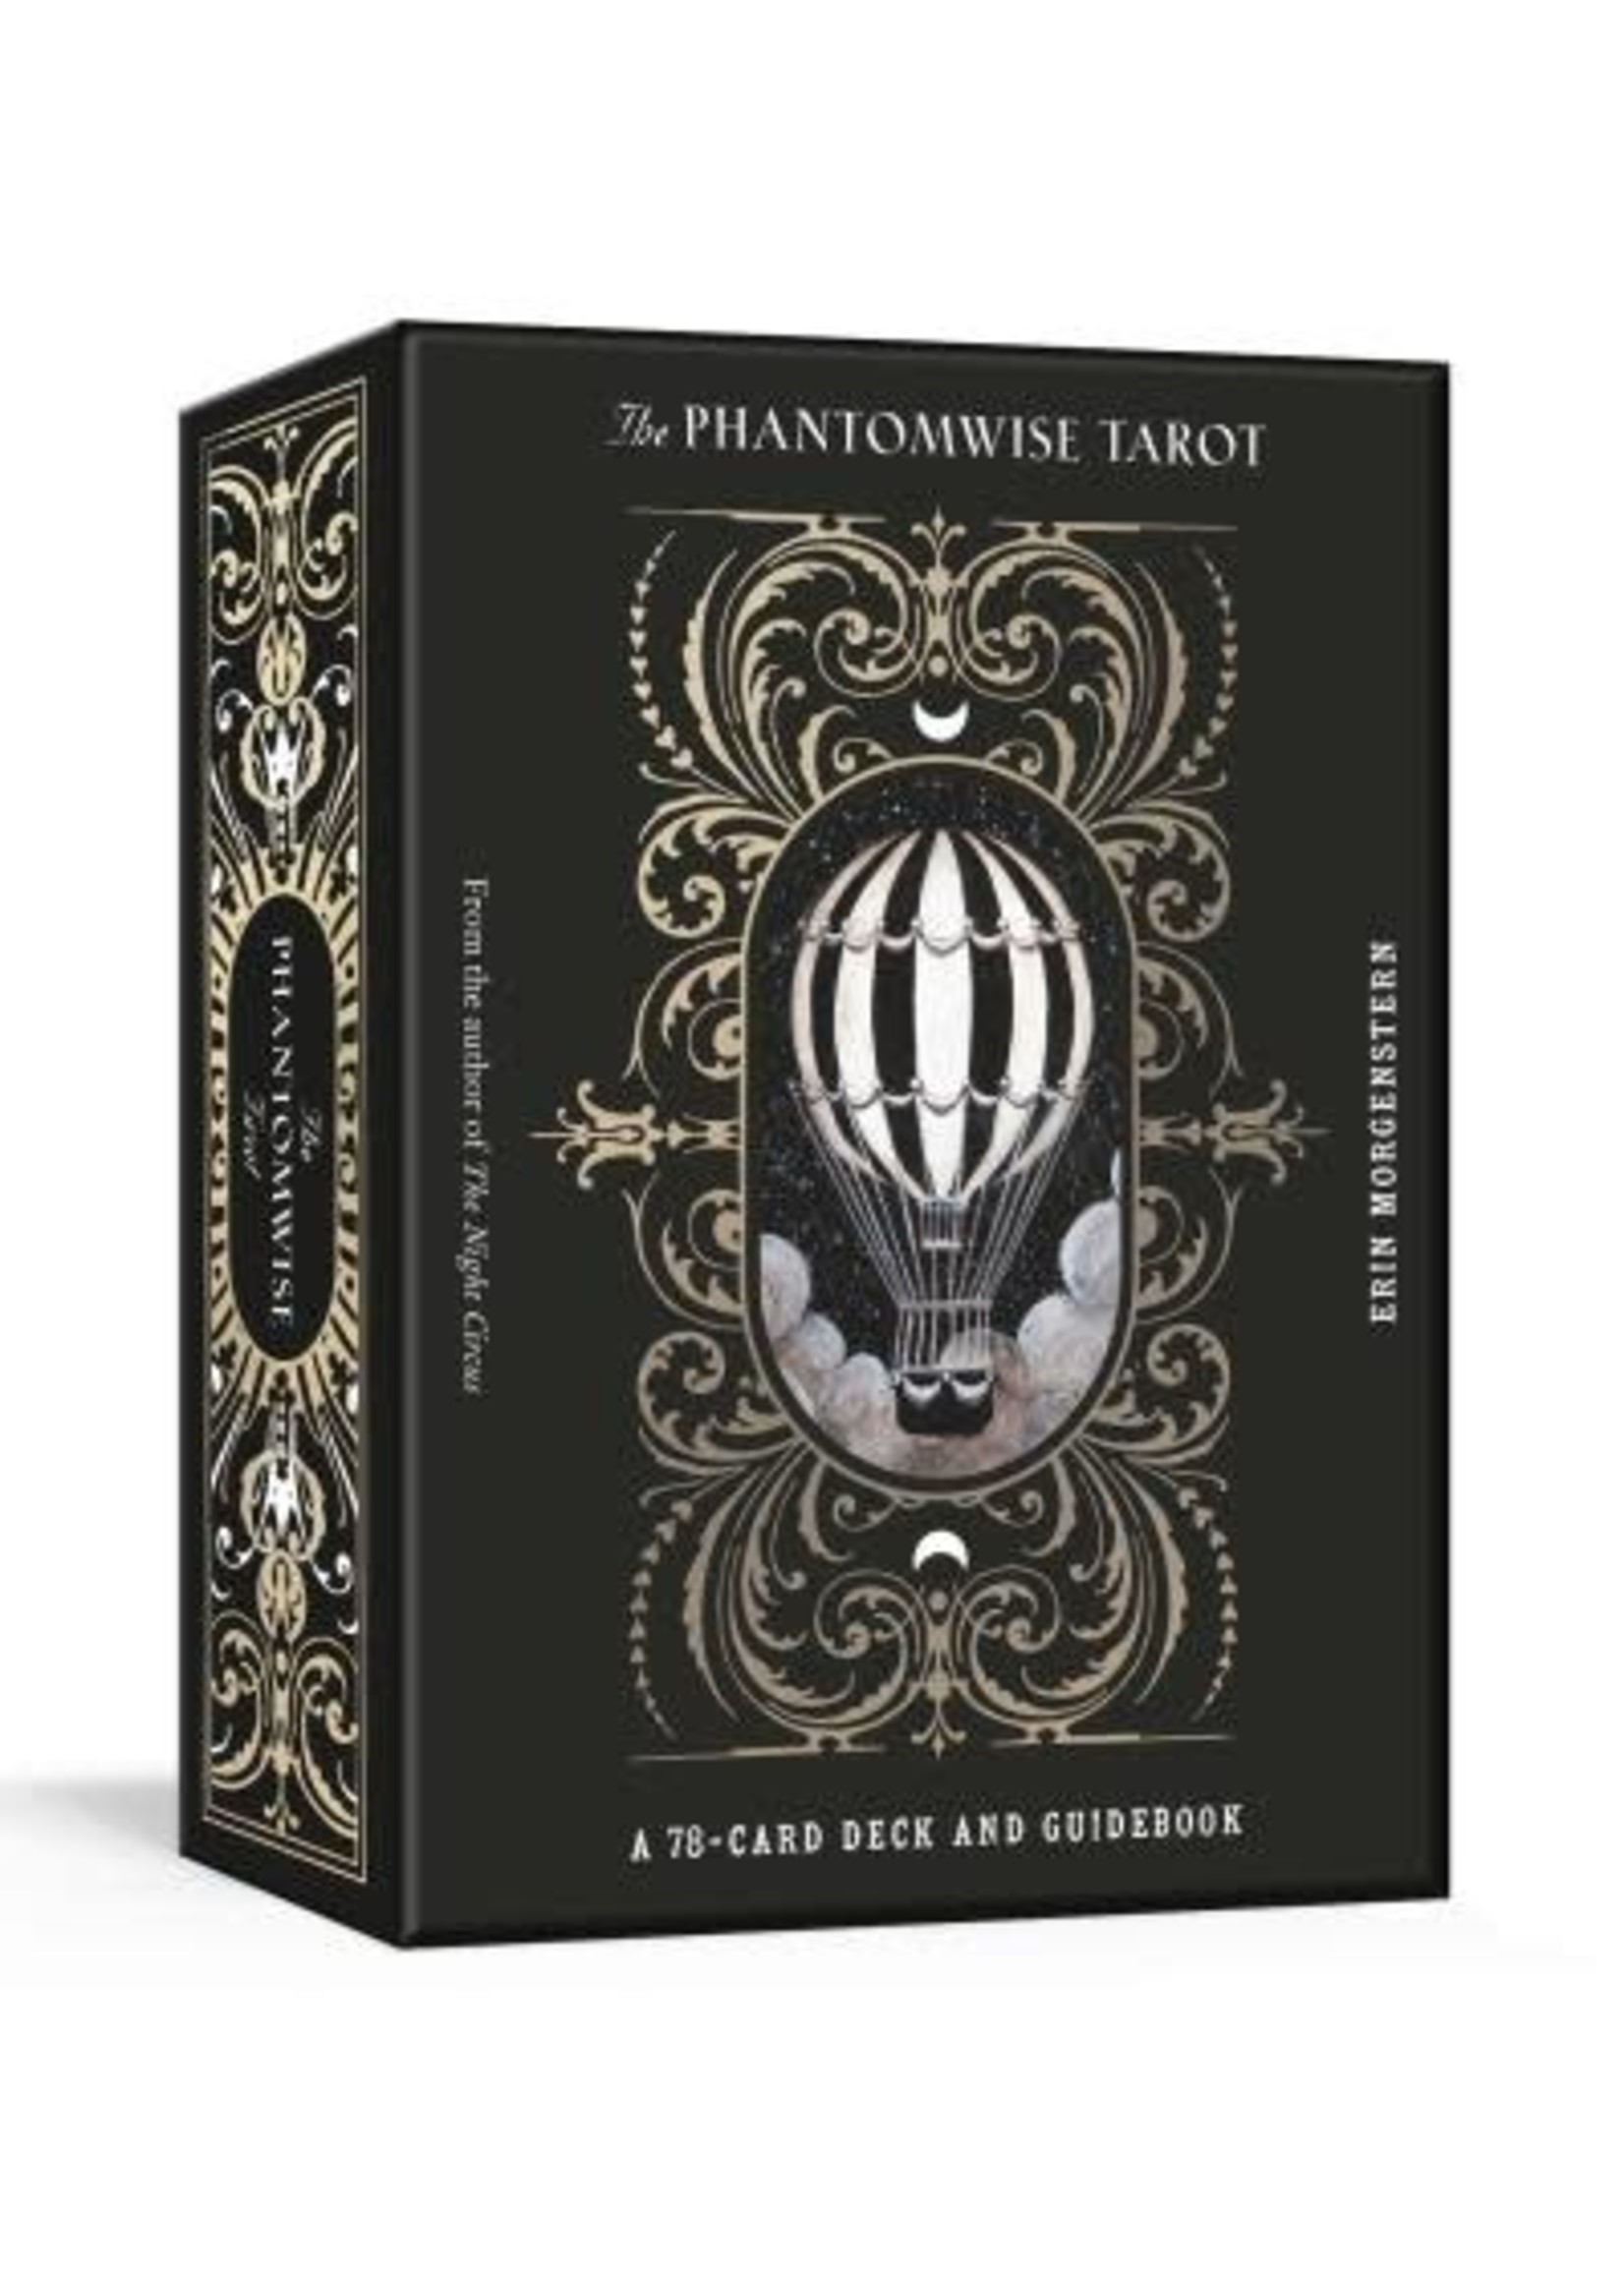 The Phantomwise Tarot: A 78-Card Deck and Guidebook by Erin Morgenstern